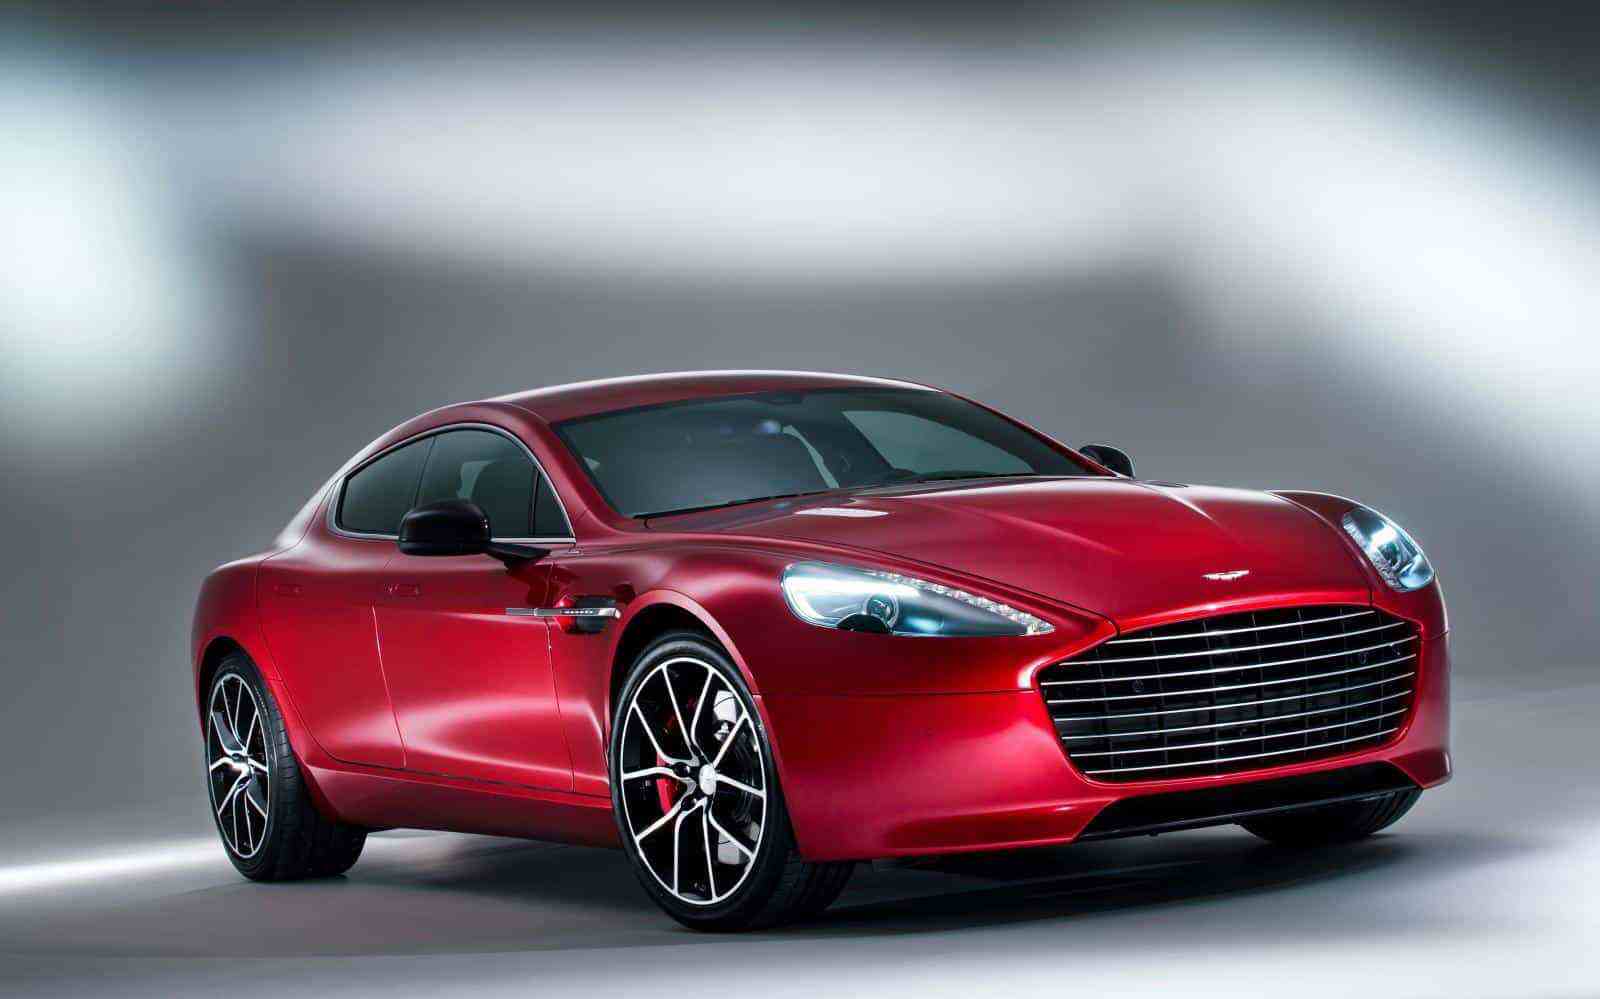 2013 Aston Martin Rapide after the facelift